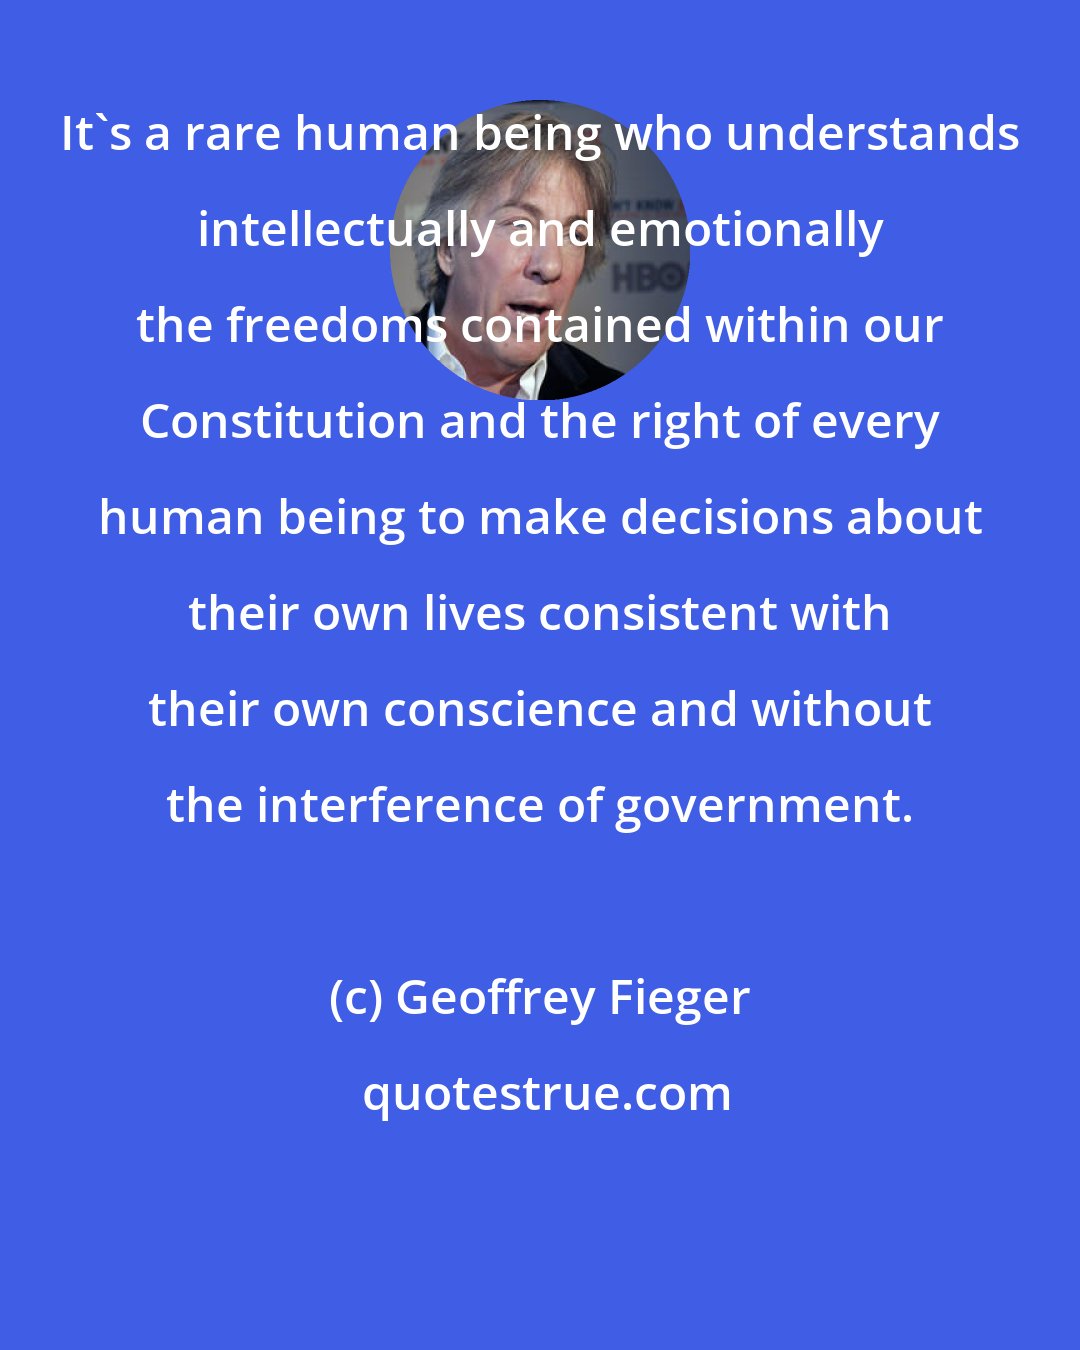 Geoffrey Fieger: It's a rare human being who understands intellectually and emotionally the freedoms contained within our Constitution and the right of every human being to make decisions about their own lives consistent with their own conscience and without the interference of government.